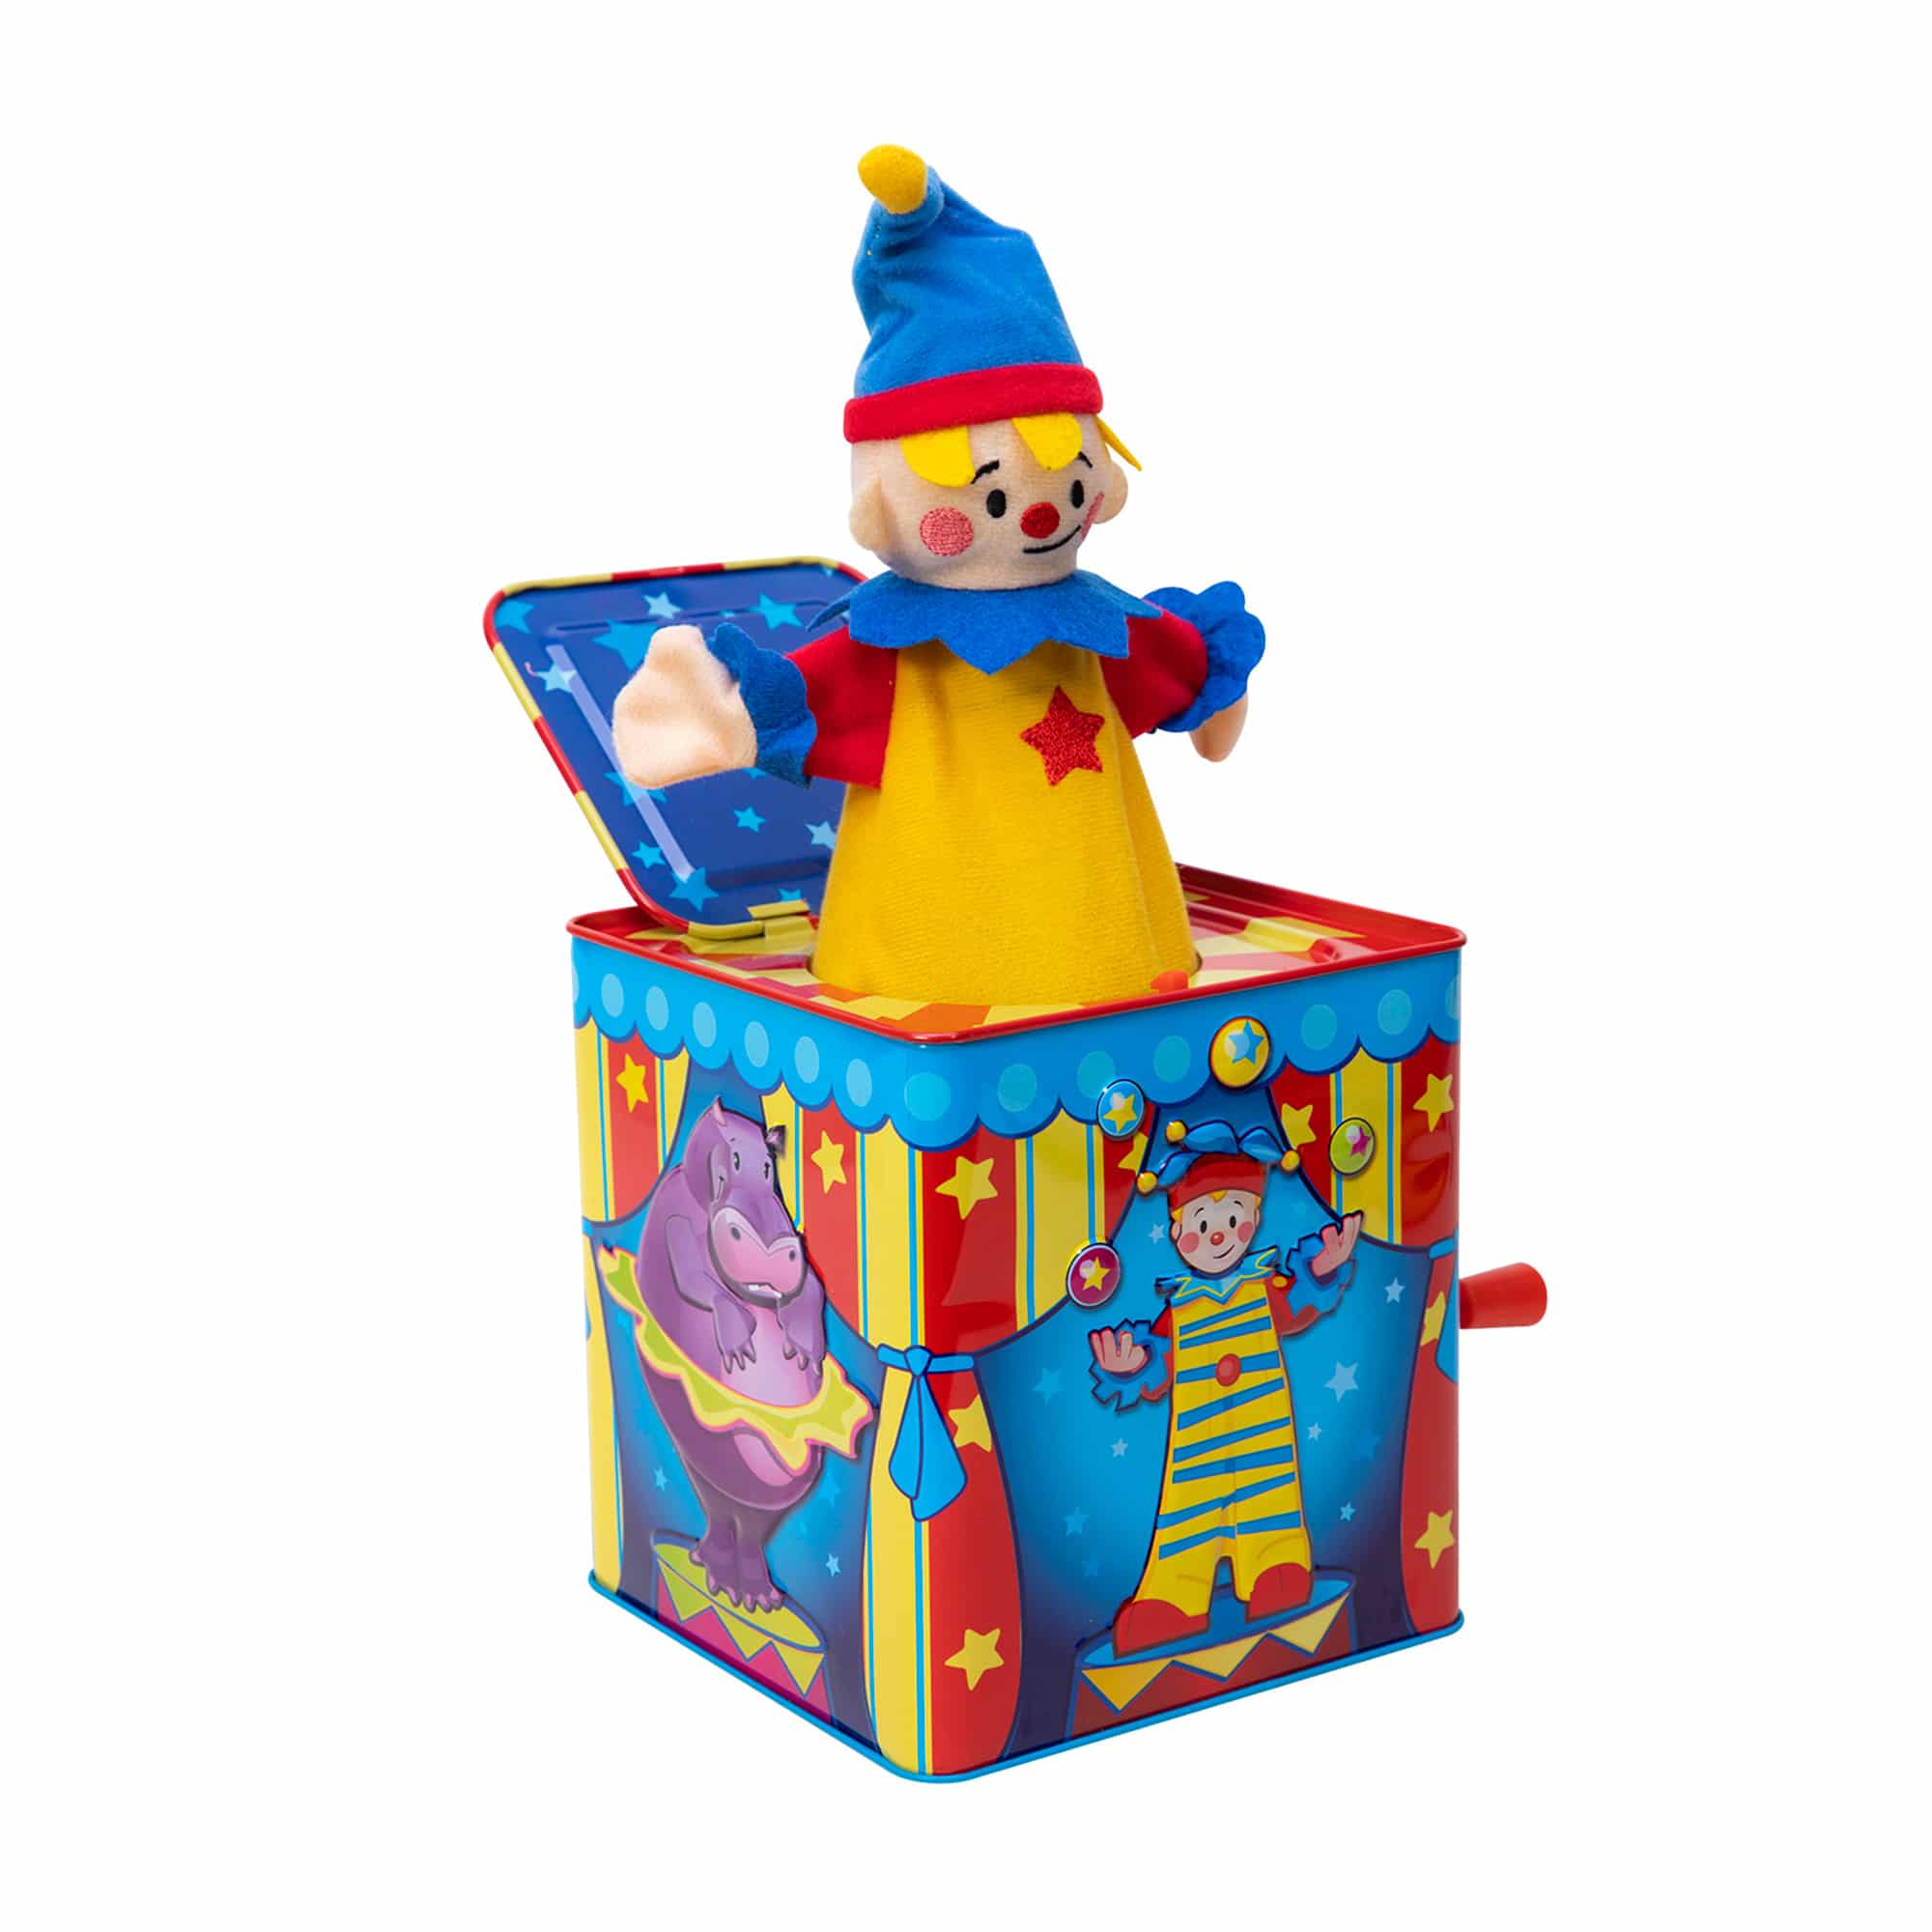 Silly Circus Jack In The Box